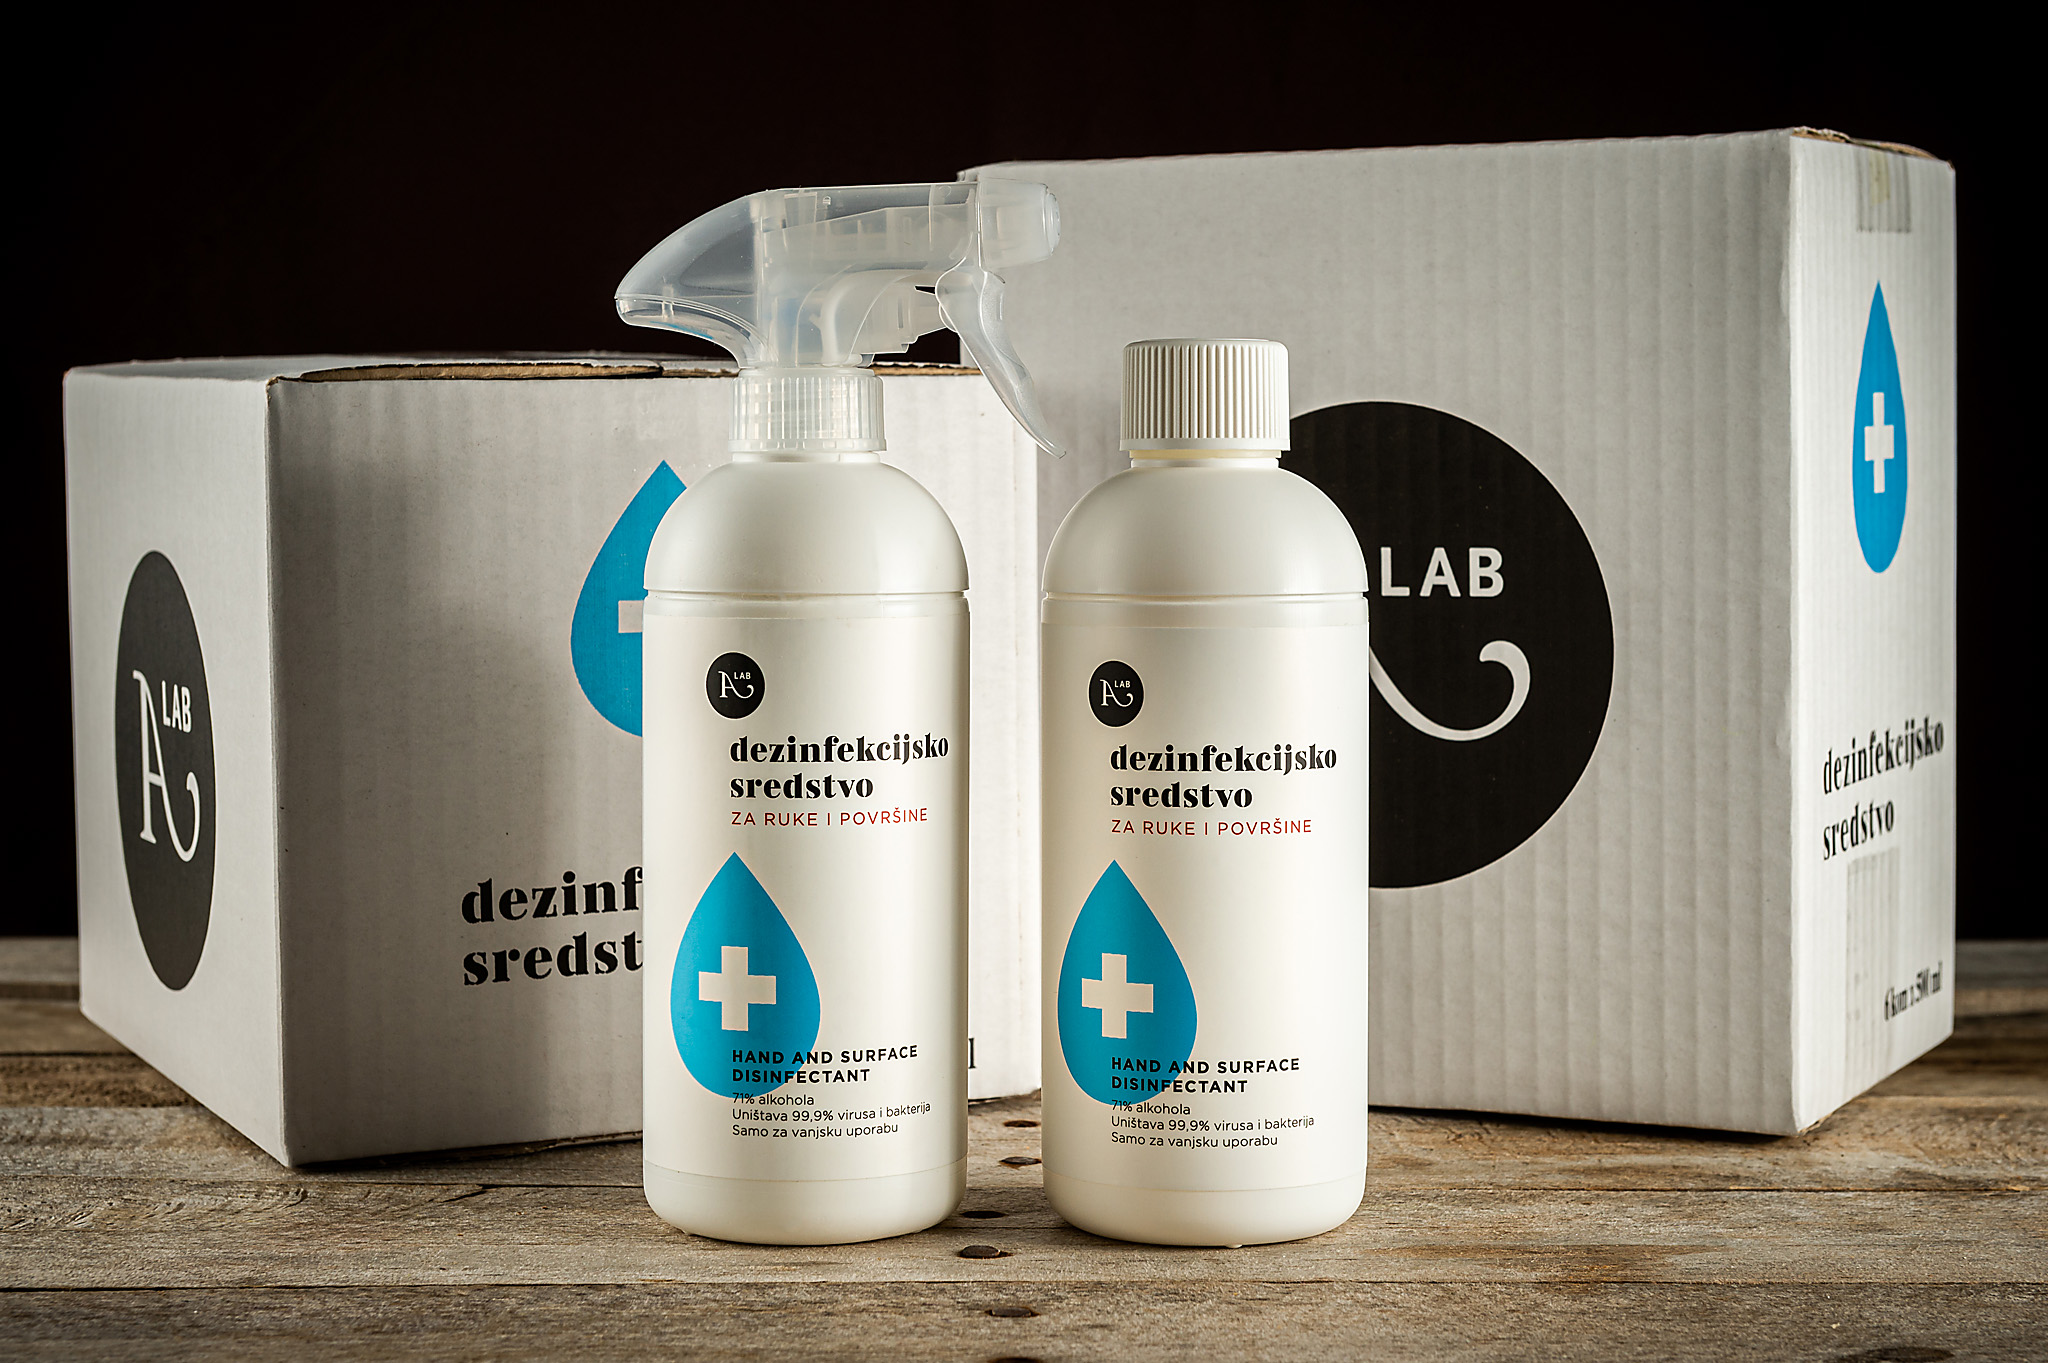 hren | plethora of creativity // A lab disinfection product photography